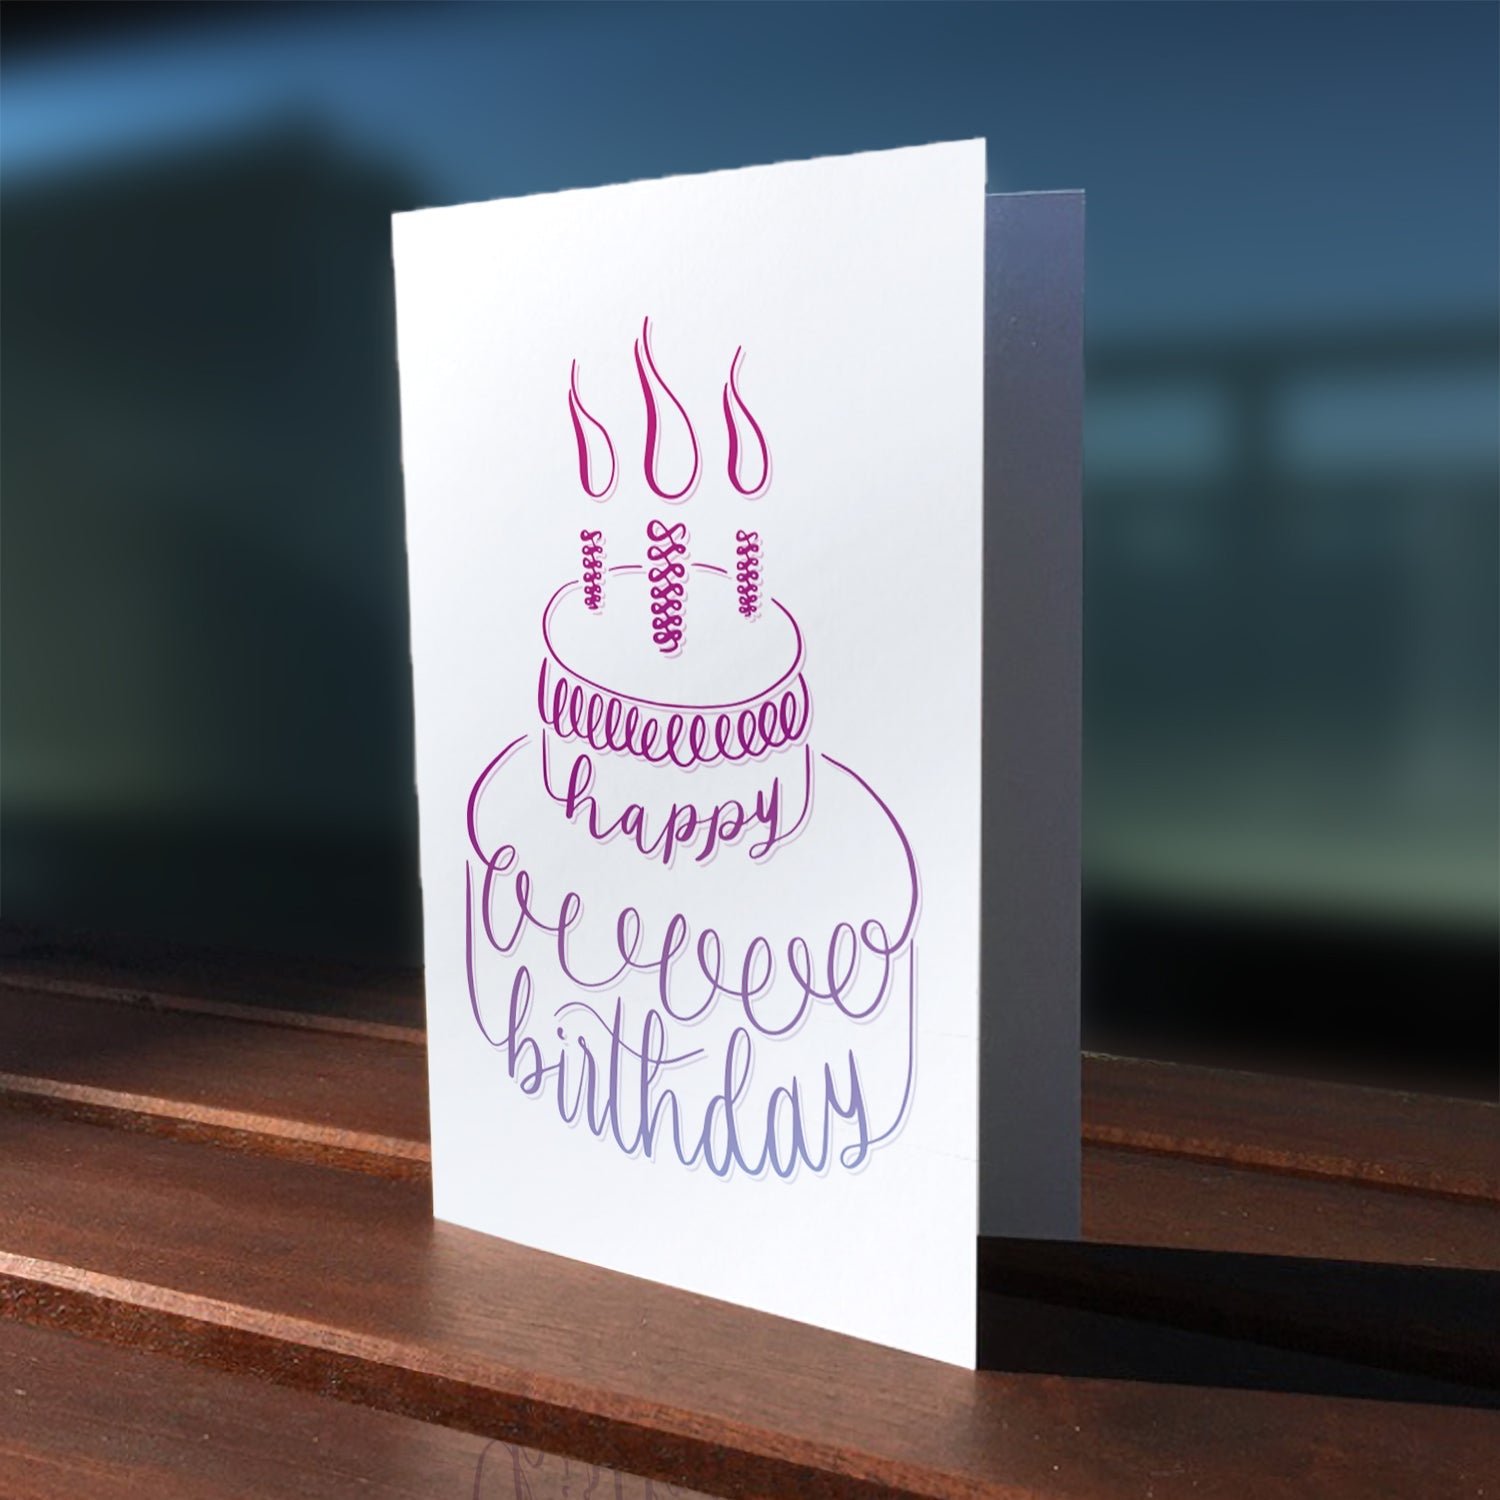 A lifestyle view of the greeting card: "Happy birthday"